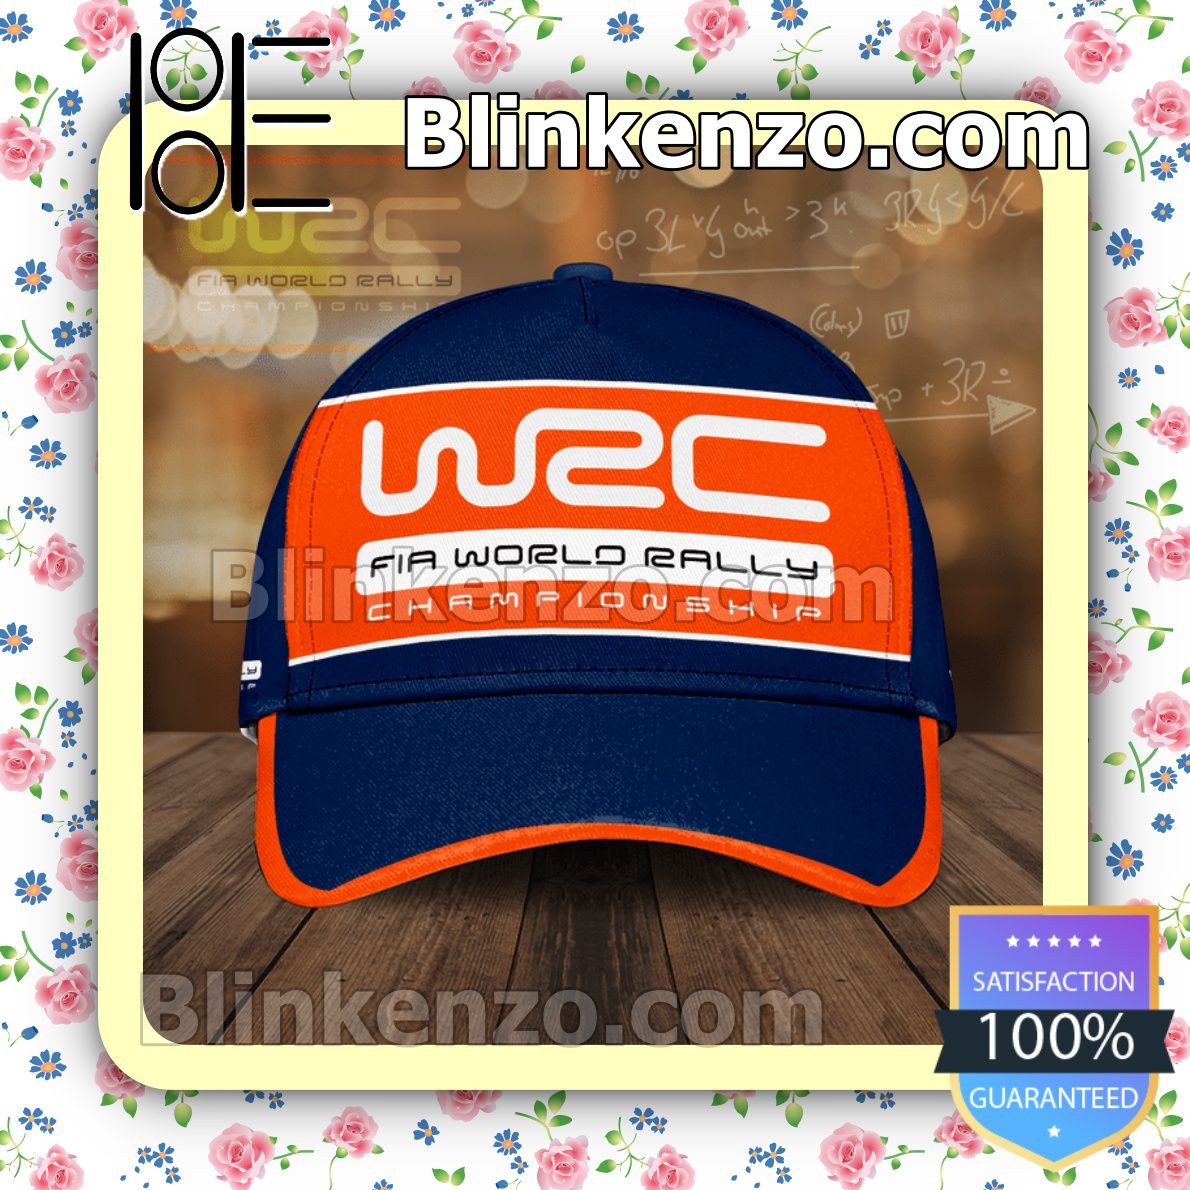 Top Rated Wrc Fia World Rally Championship Orange And Blue Baseball Caps Gift For Boyfriend